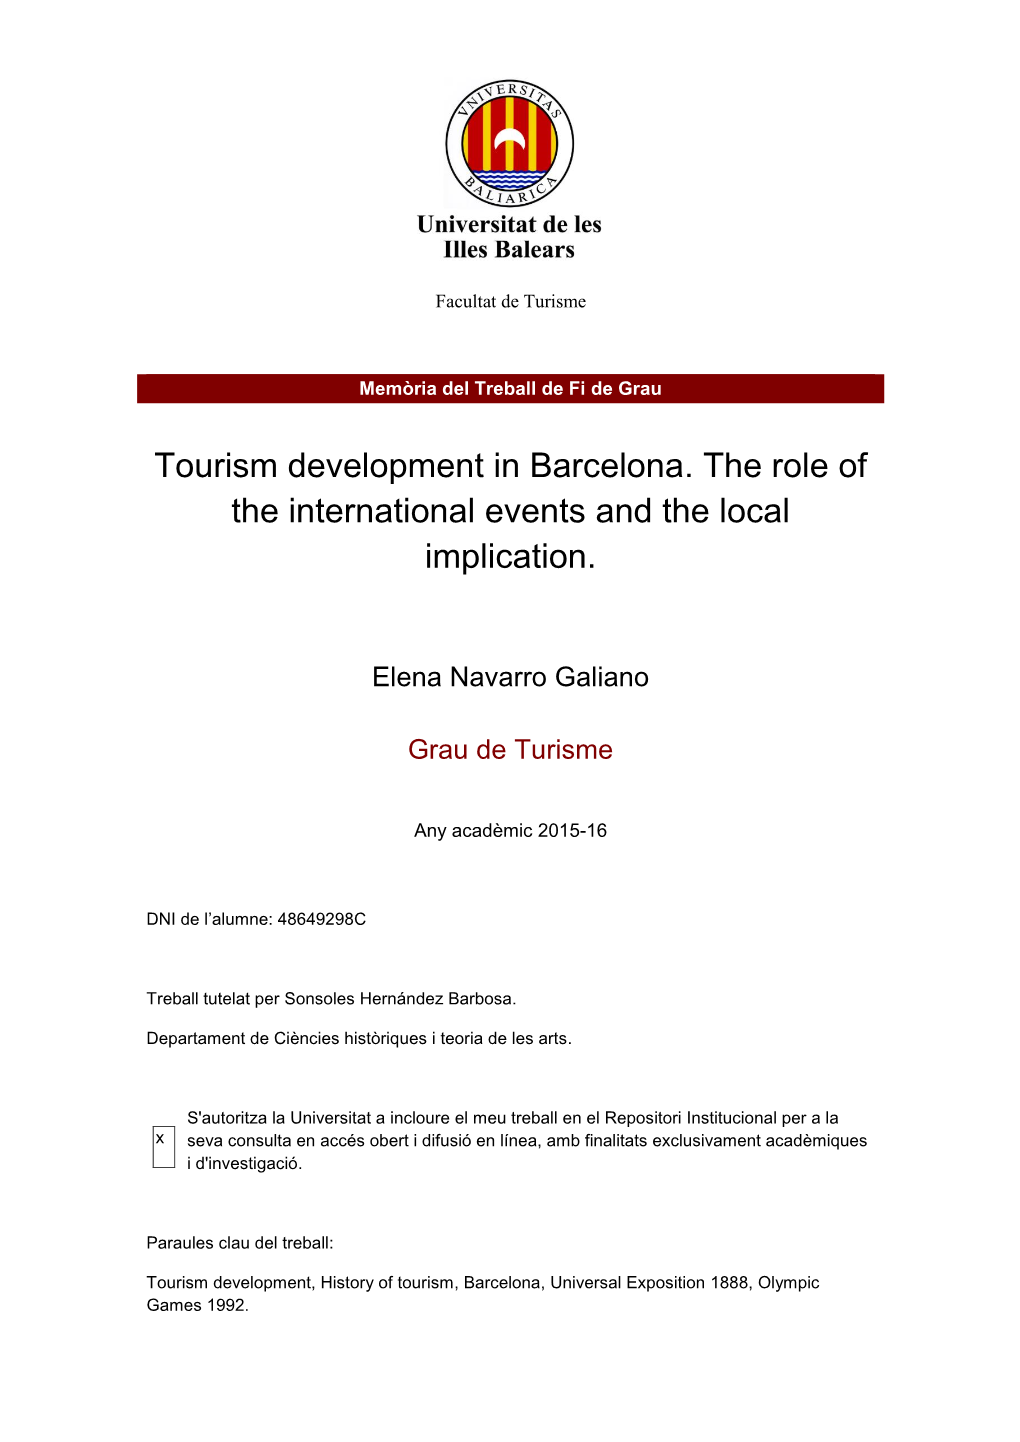 Tourism Development in Barcelona. the Role of the International Events and the Local Implication